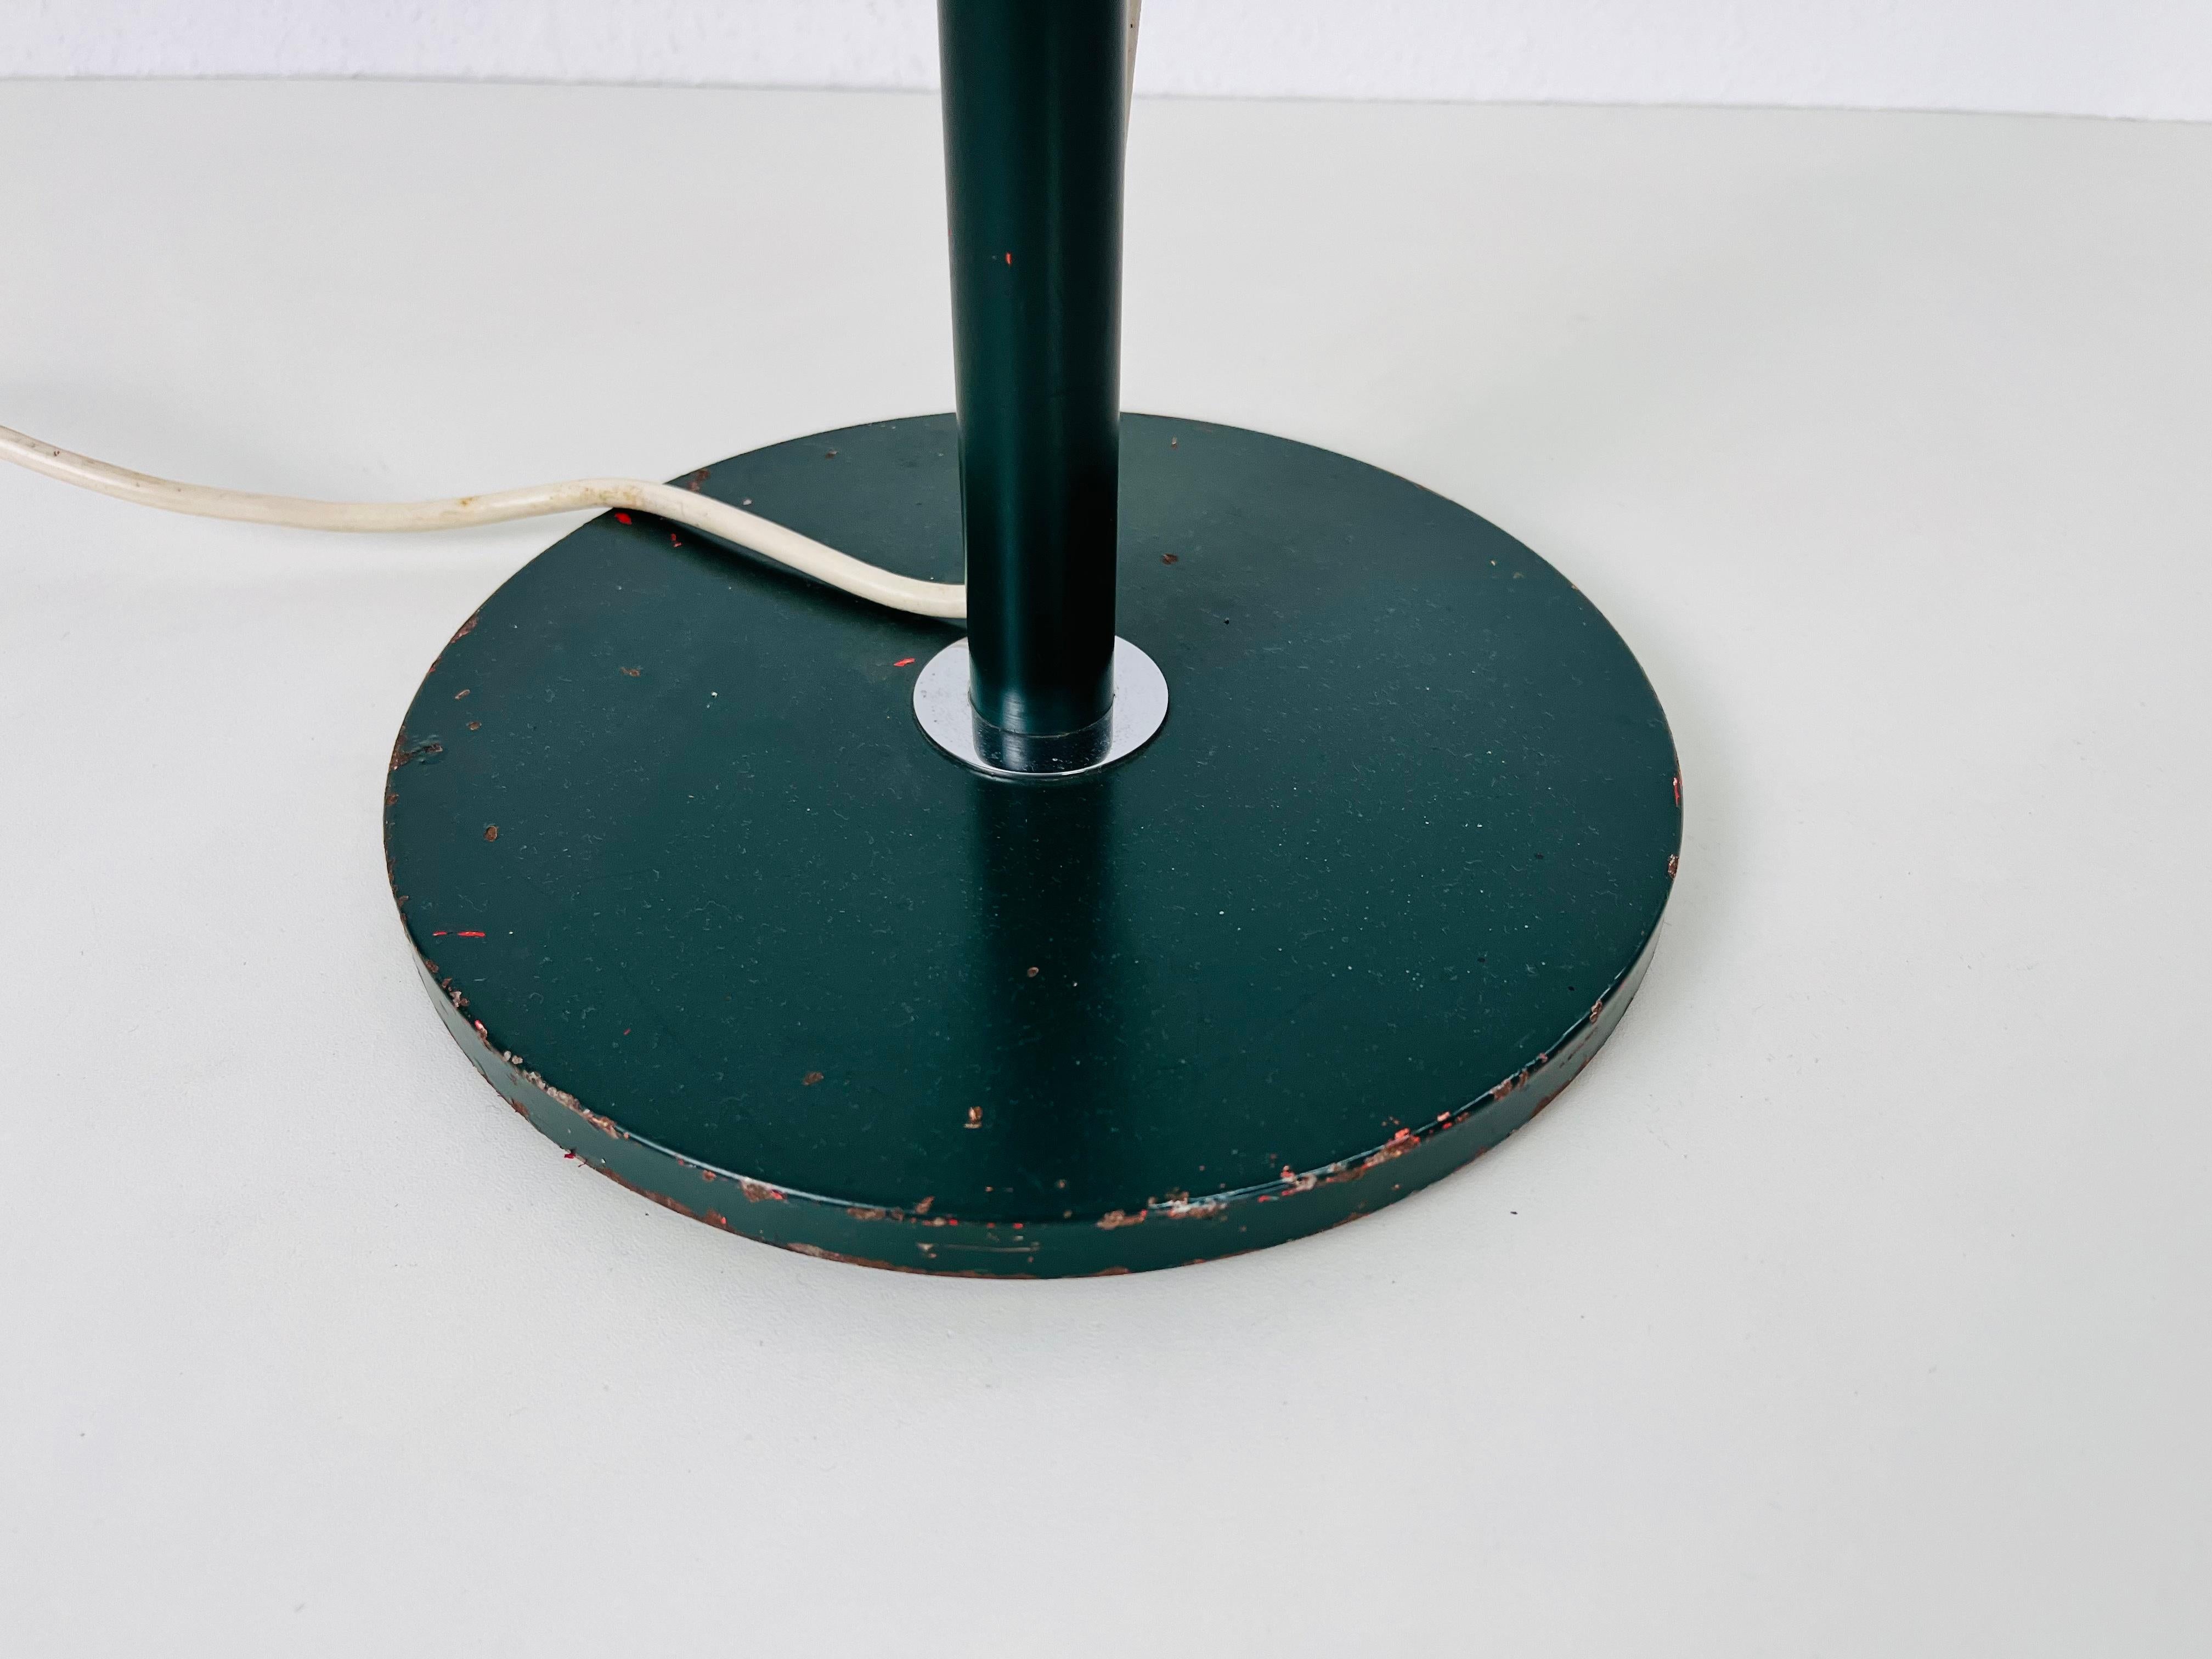 Mid-20th Century Midcentury Green Space Age Floor Lamp, Germany, 1960s For Sale